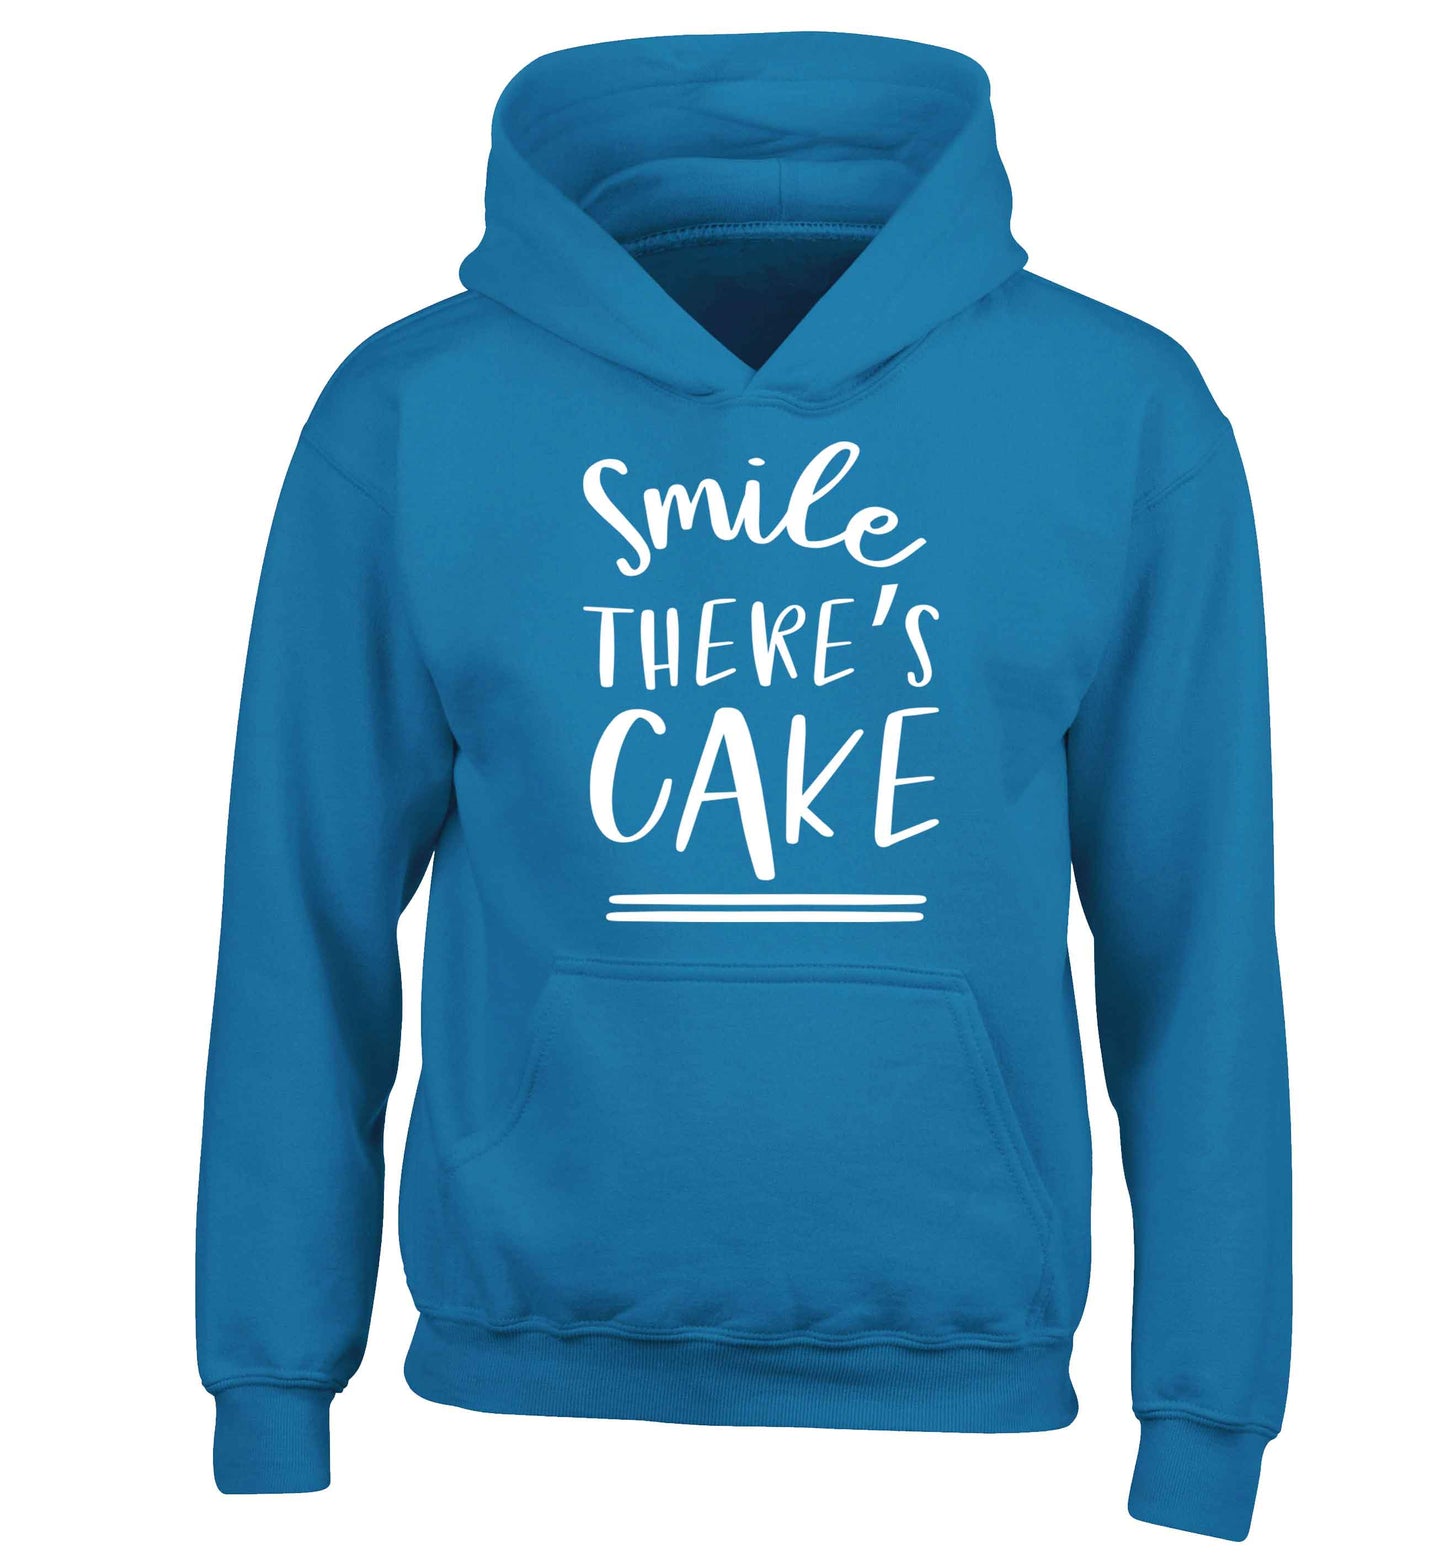 Smile there's cake children's blue hoodie 12-13 Years